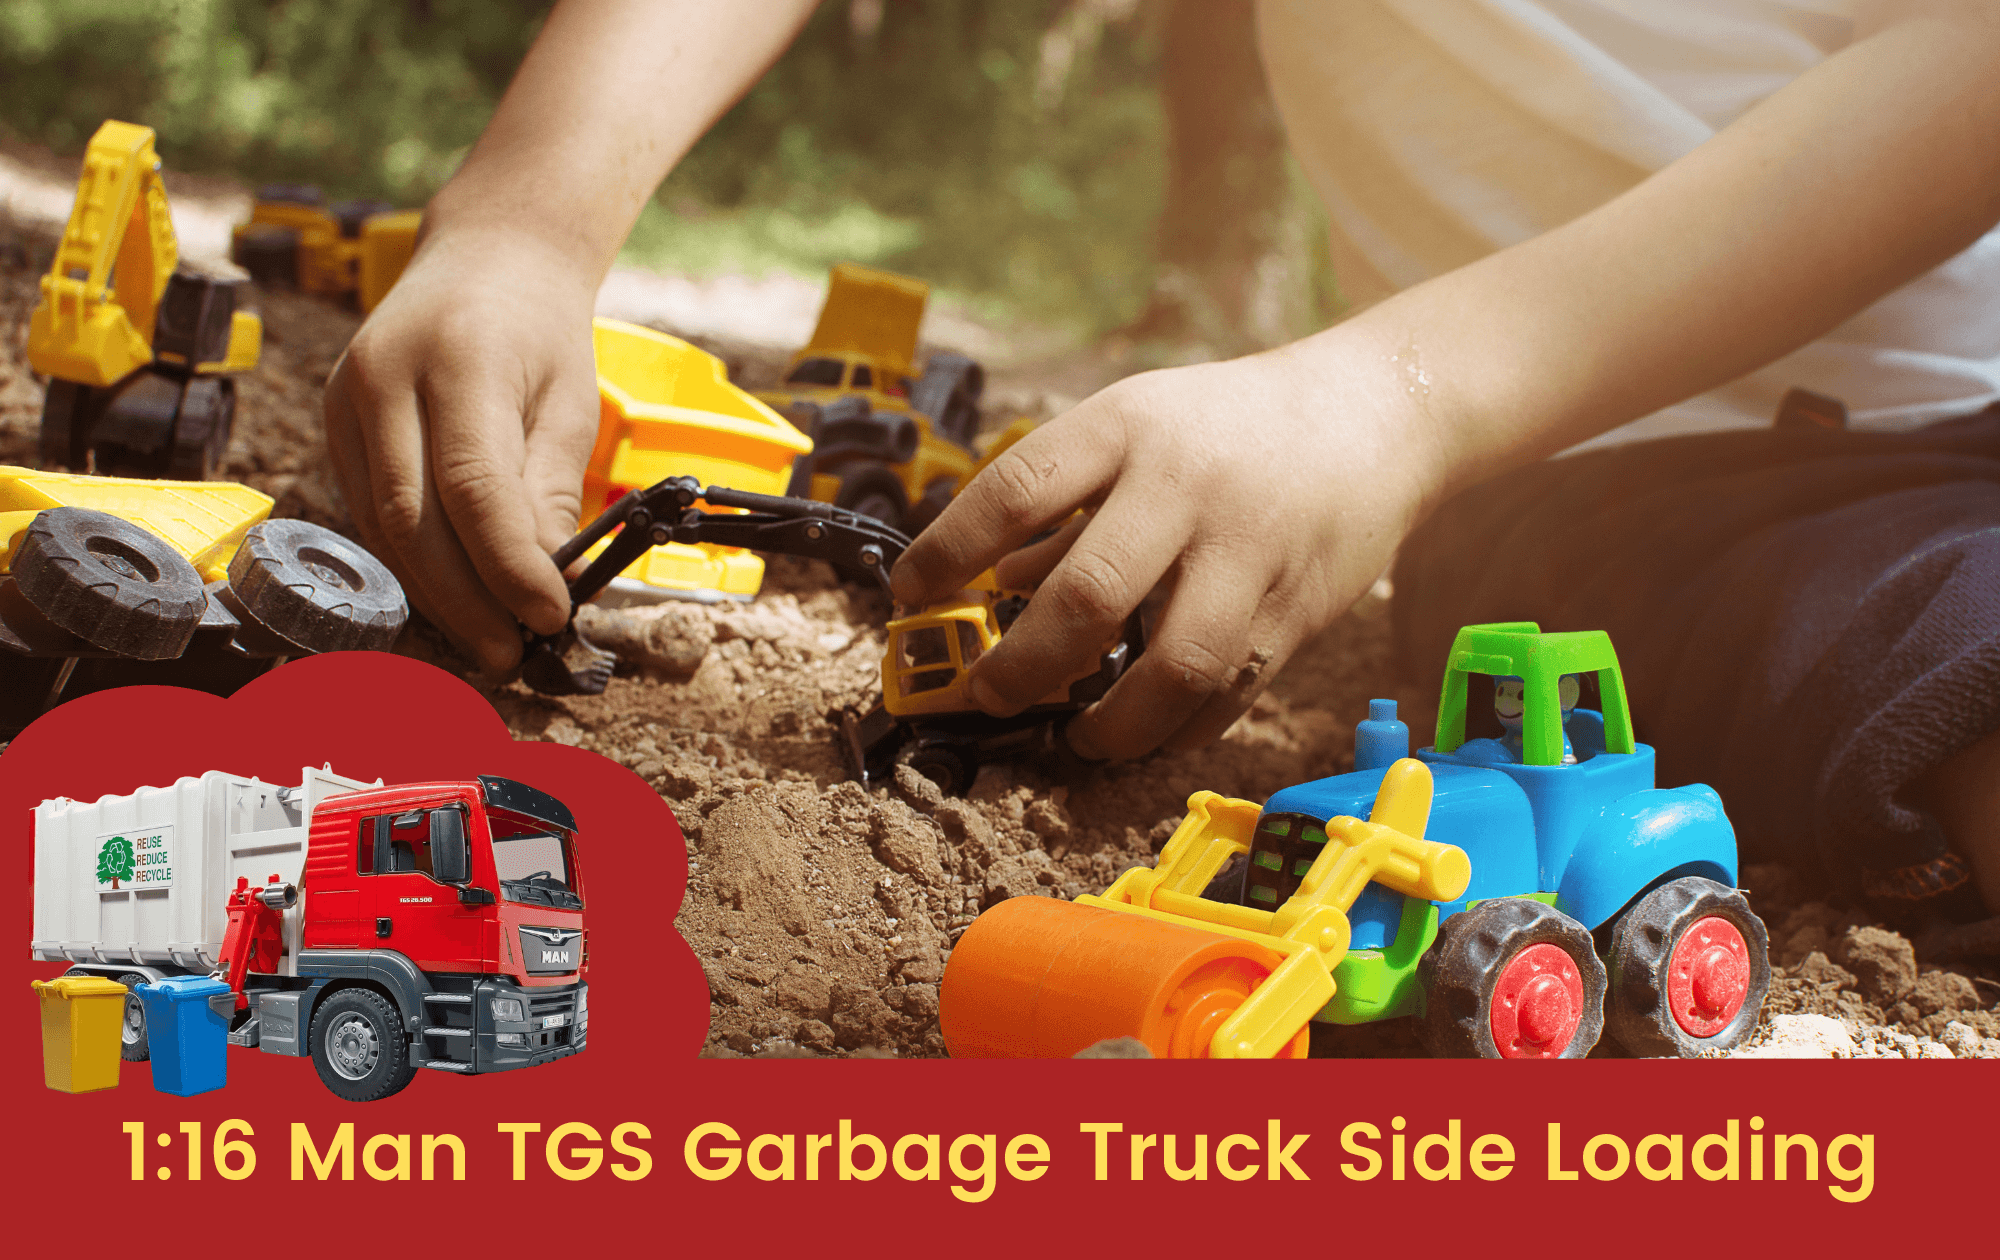 Kid playing happily with Garbage truck toy in dirt, Toyworld, toy kingdom, Byron Bay Lismore